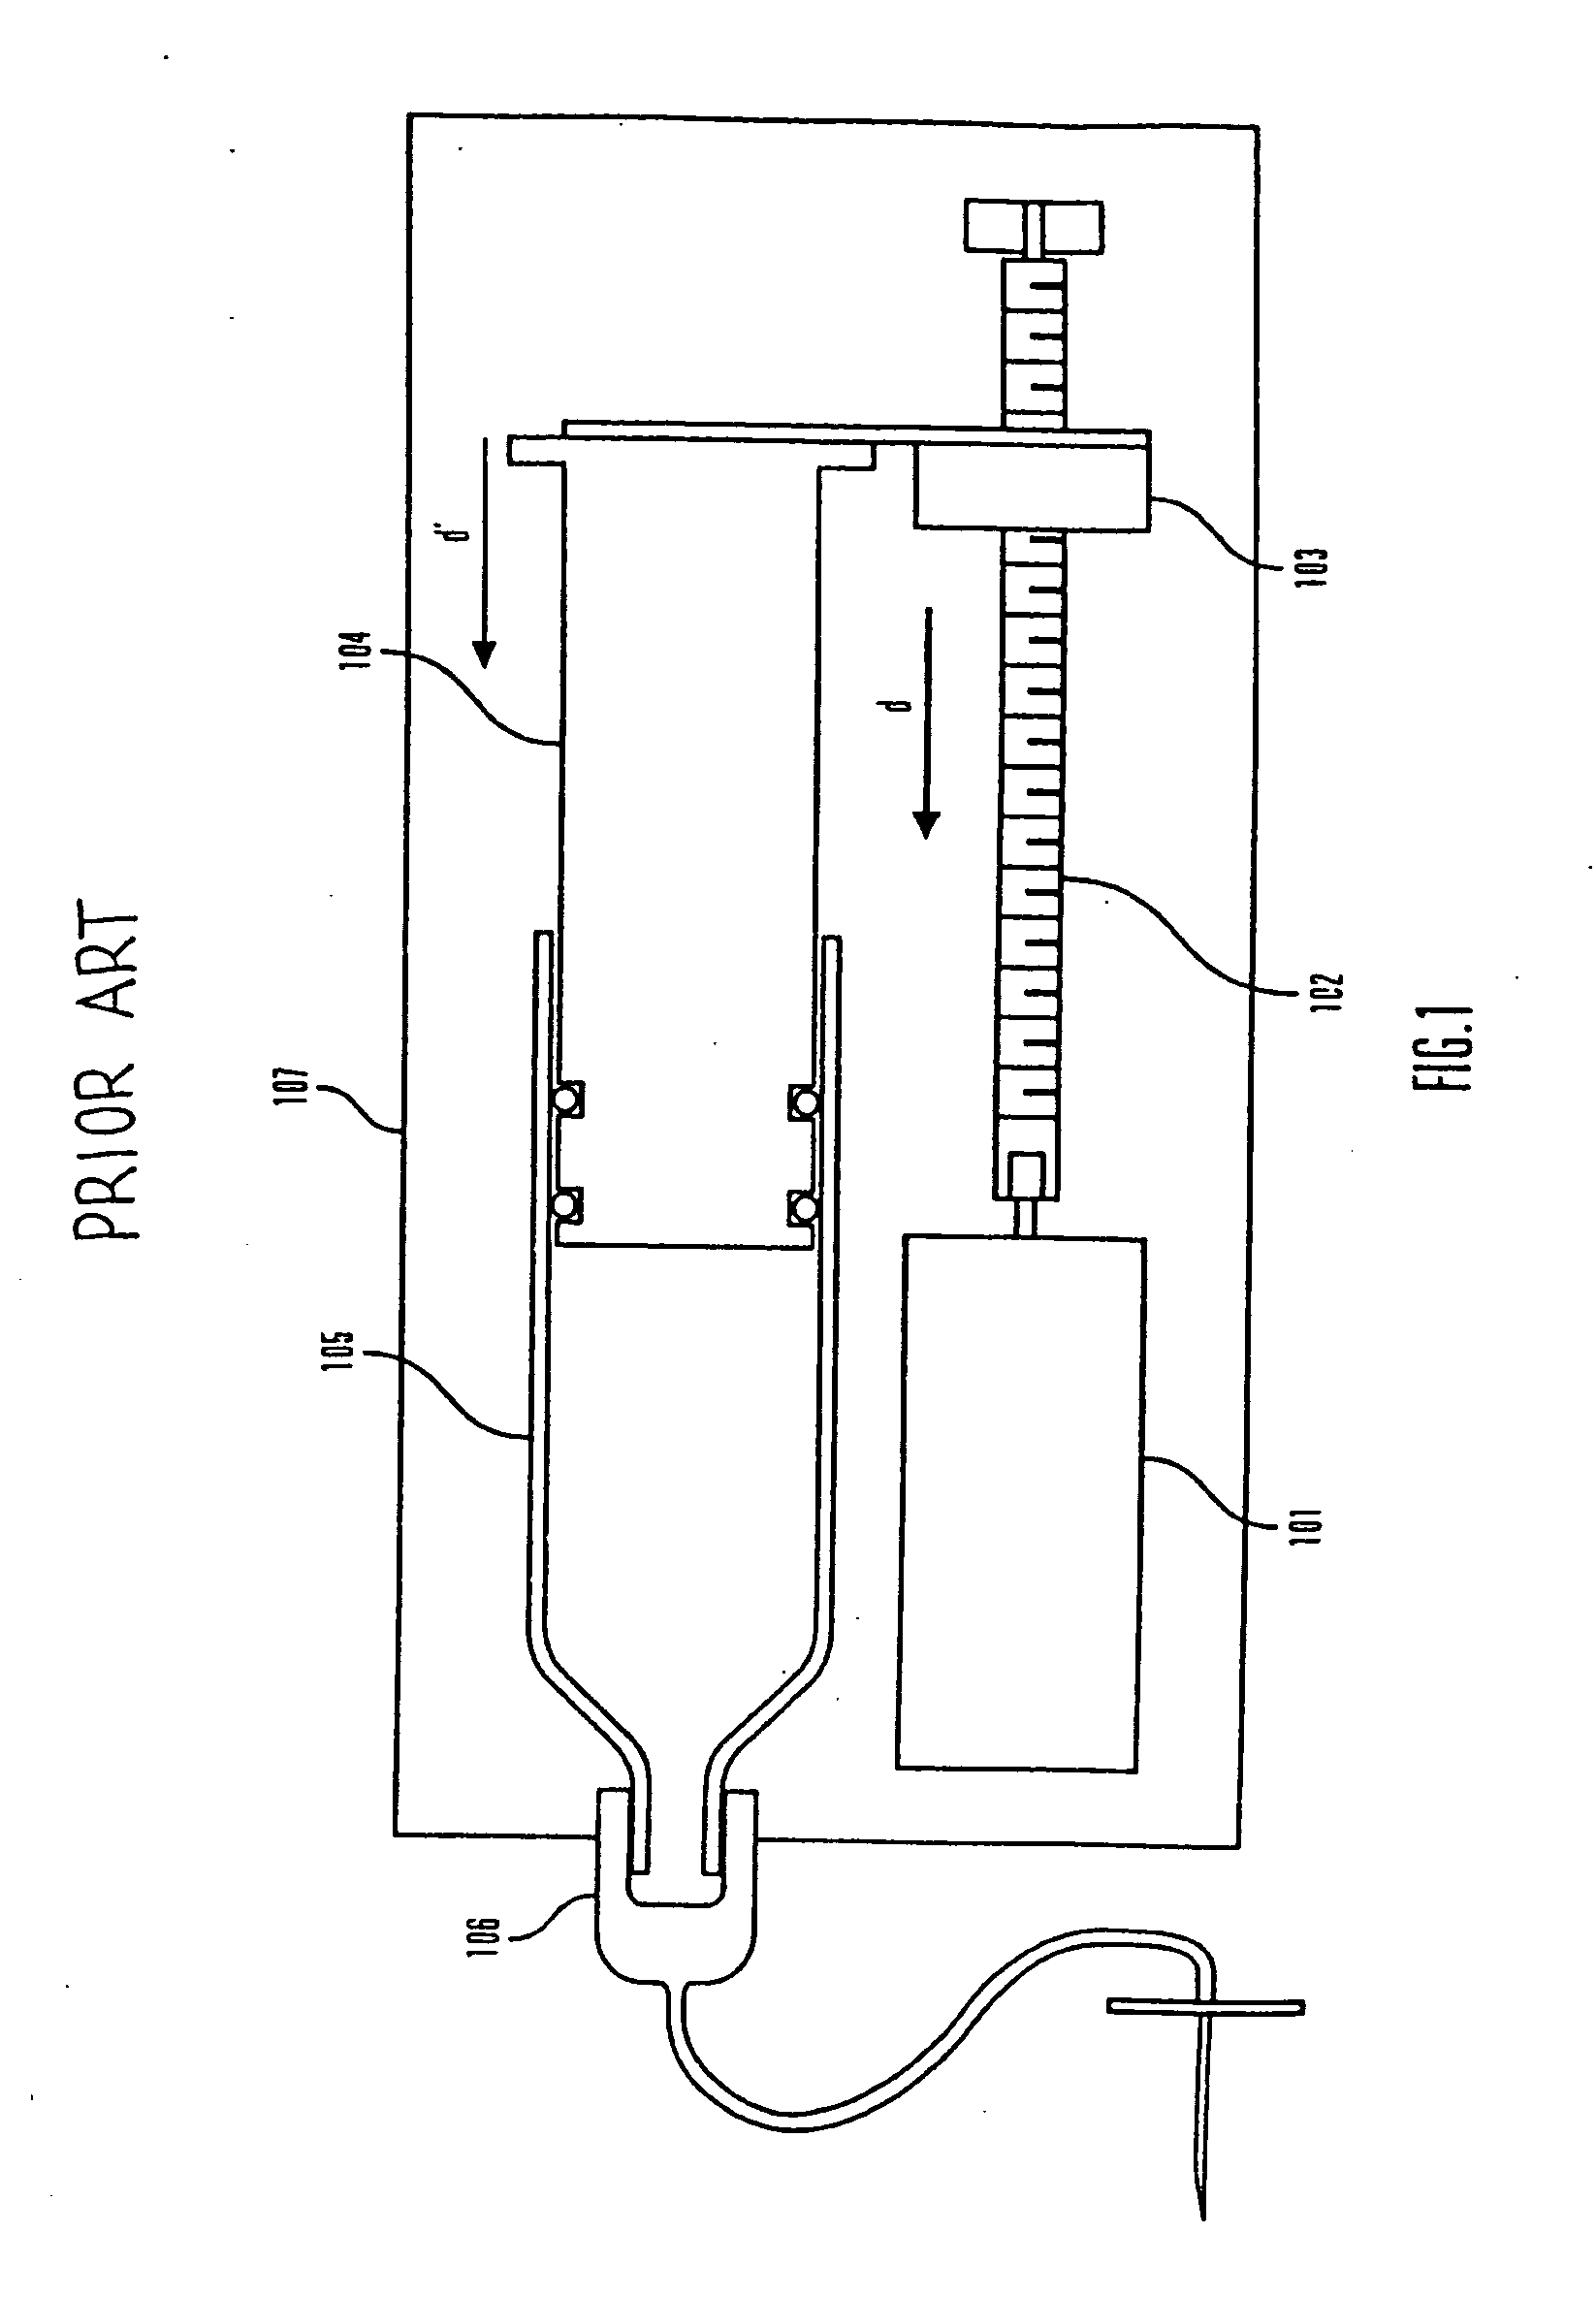 Method and apparatus for detecting occlusions in an ambulatory infusion pump